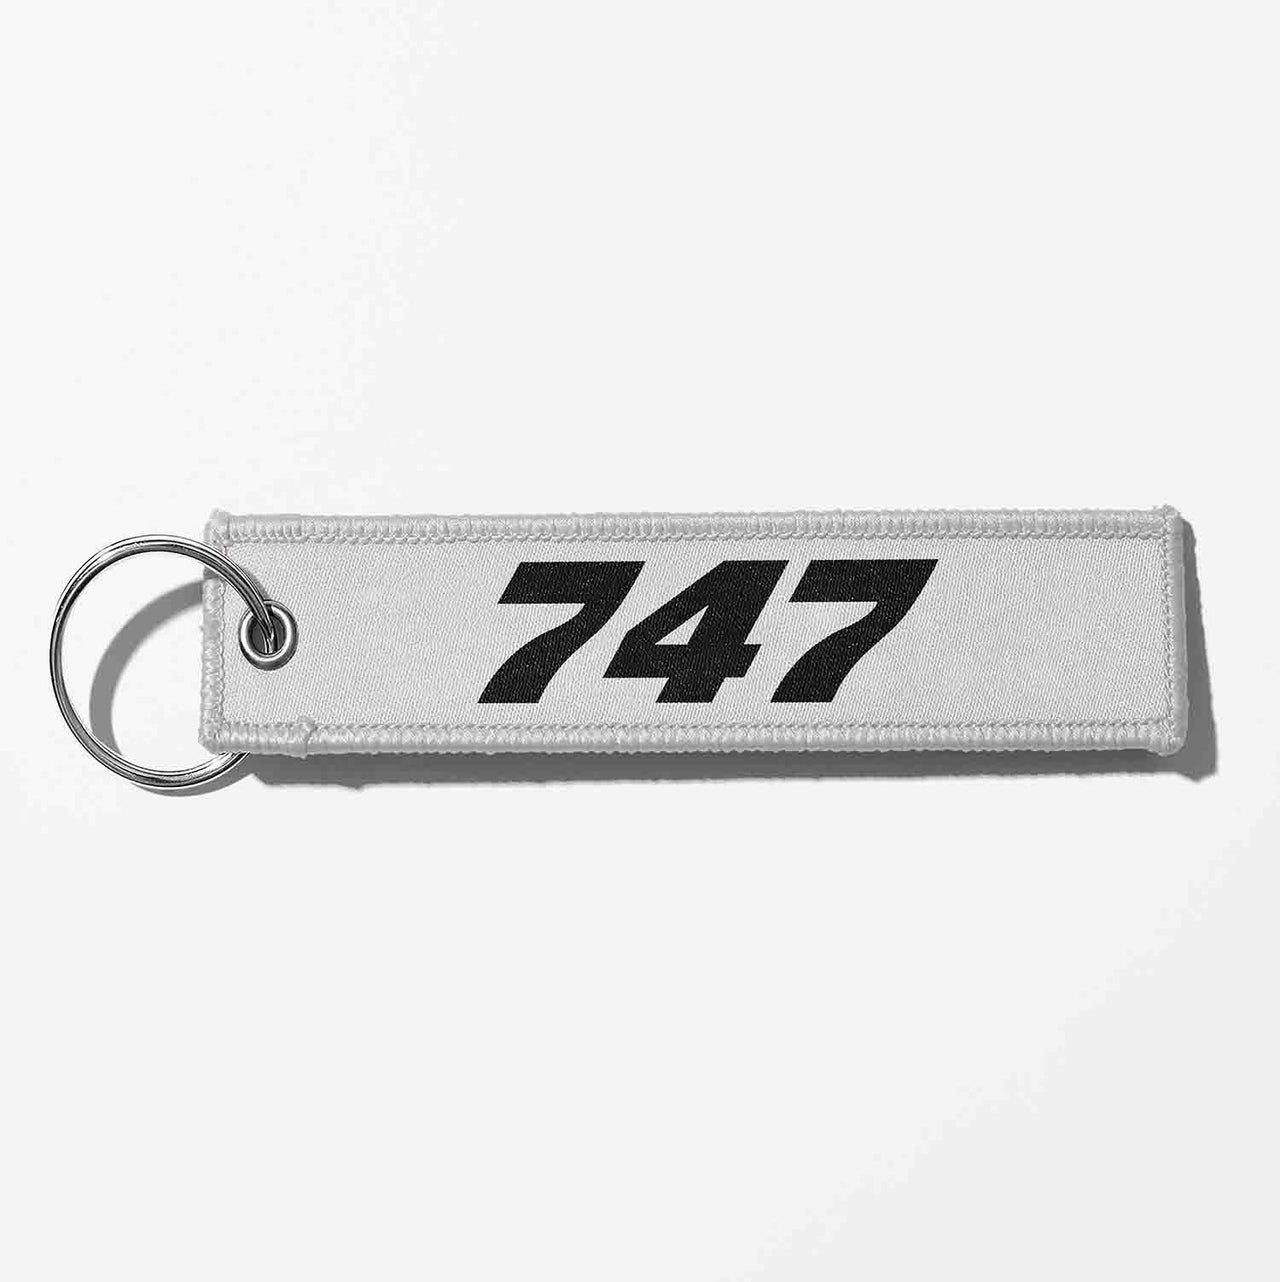 Boeing 747 Flat Text Designed Key Chains